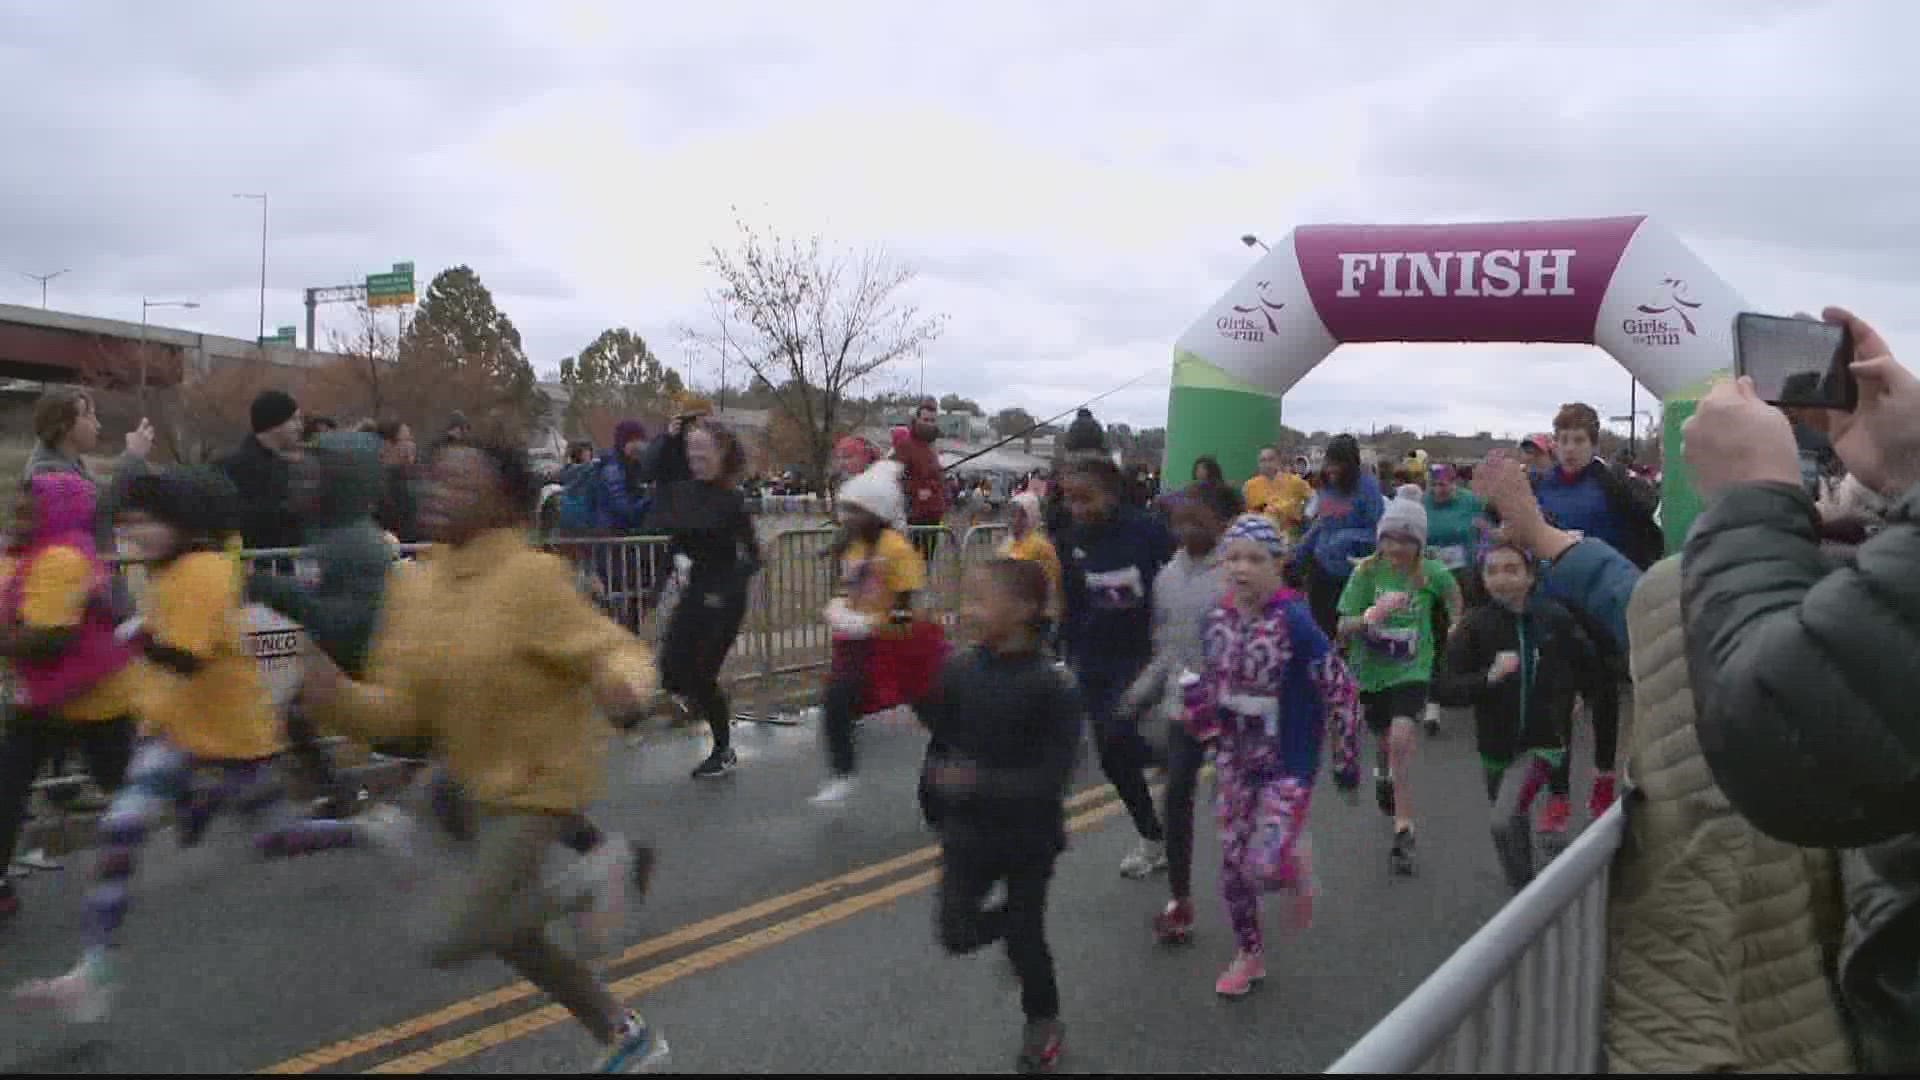 Girls on the Run, a national organization that aims young girls, held its 5k event Sunday morning in Southeast D.C.